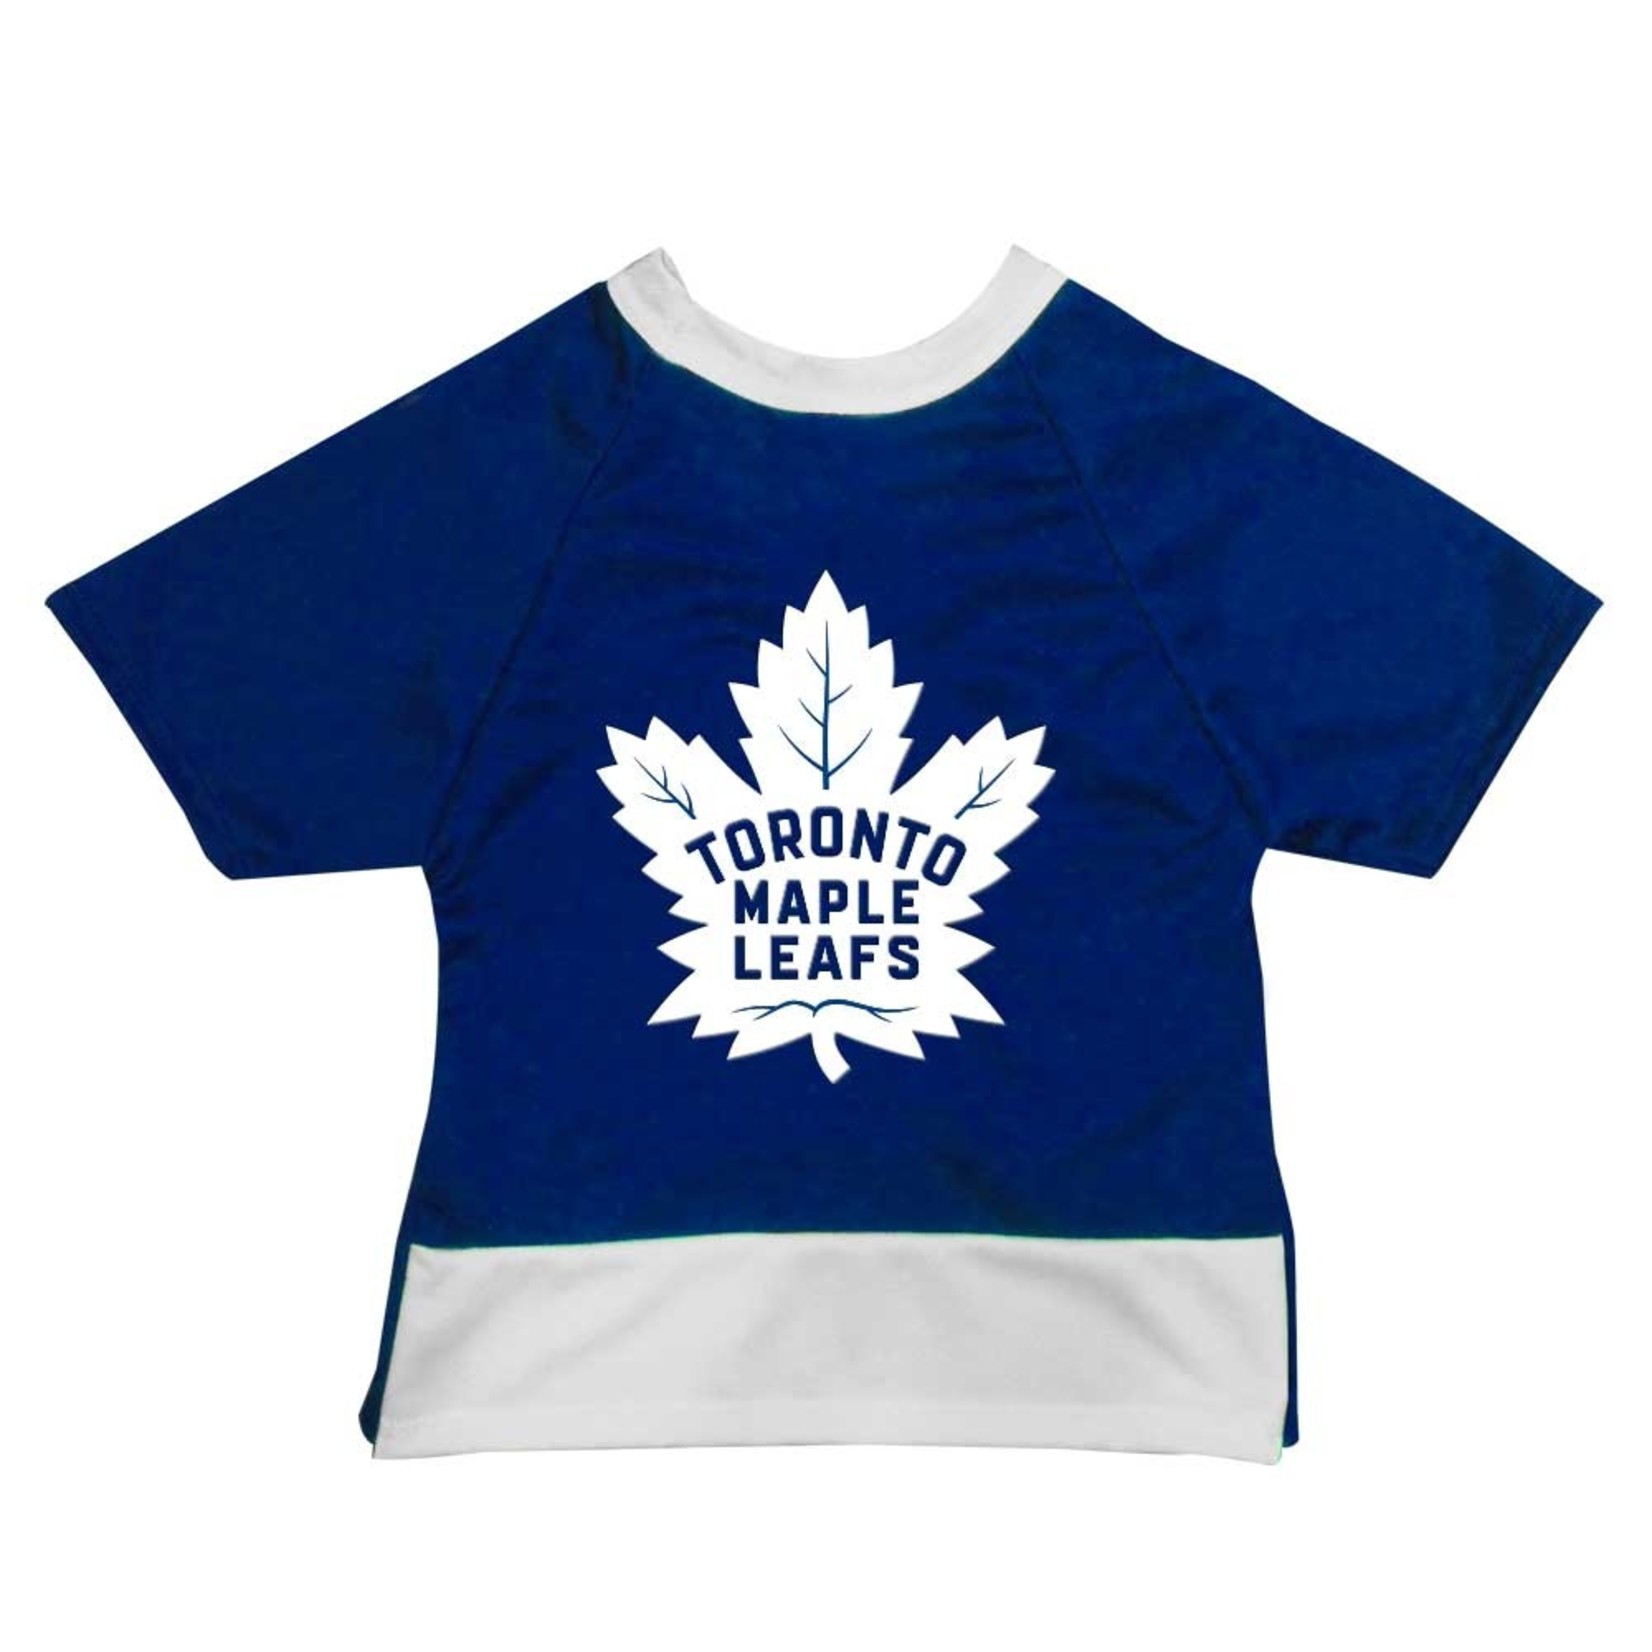 Kane Pet All Star Dogs - Leafs Jersey XLG 40-60lbs